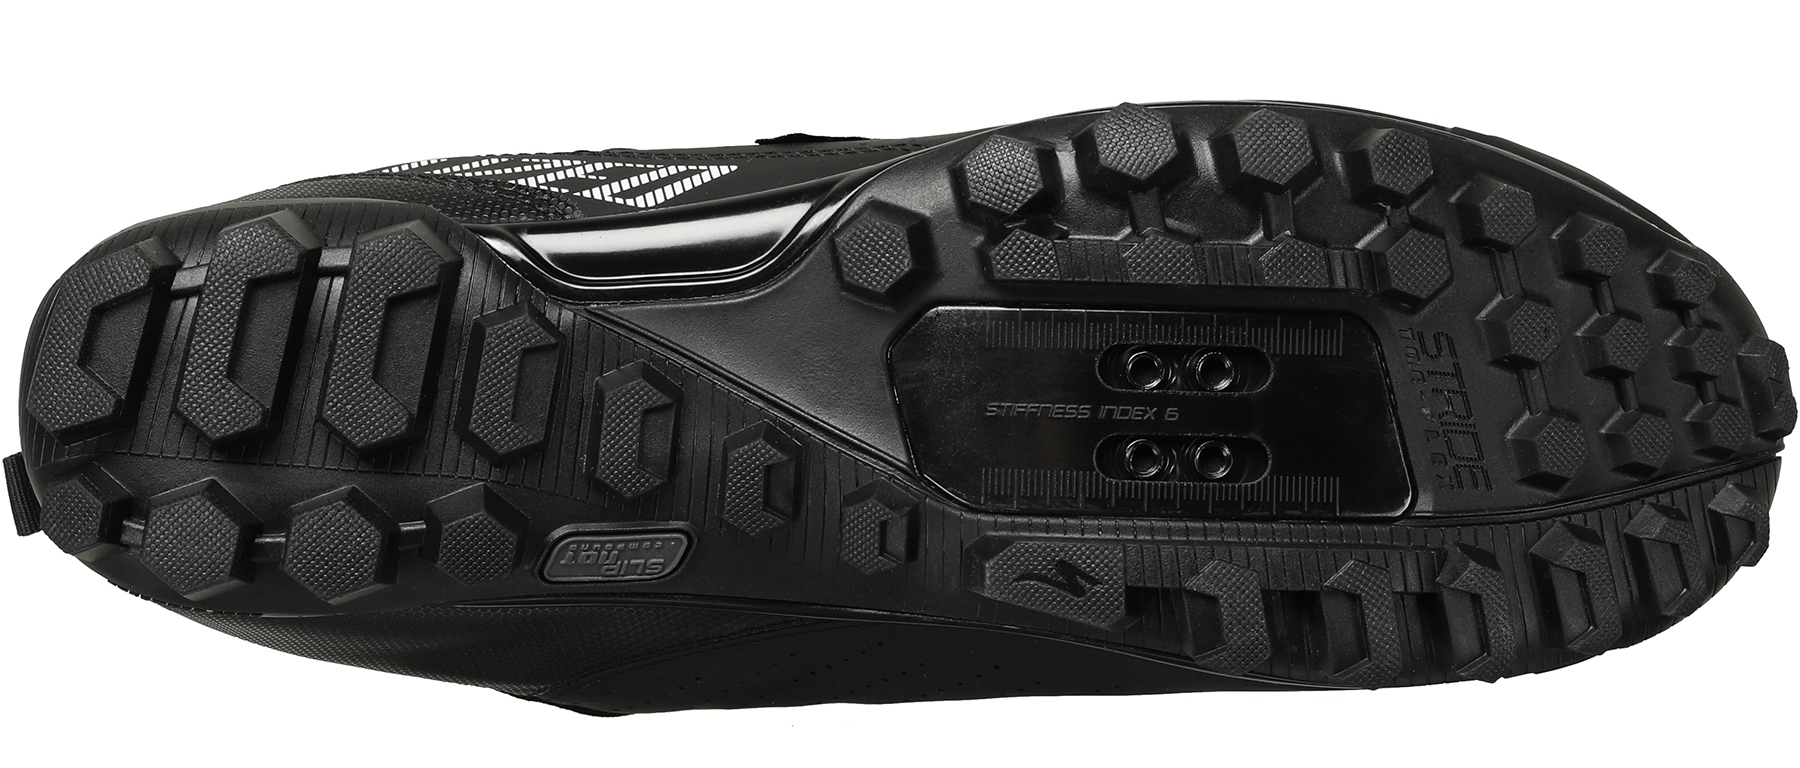 Specialized Recon 1.0 Mountain Shoe